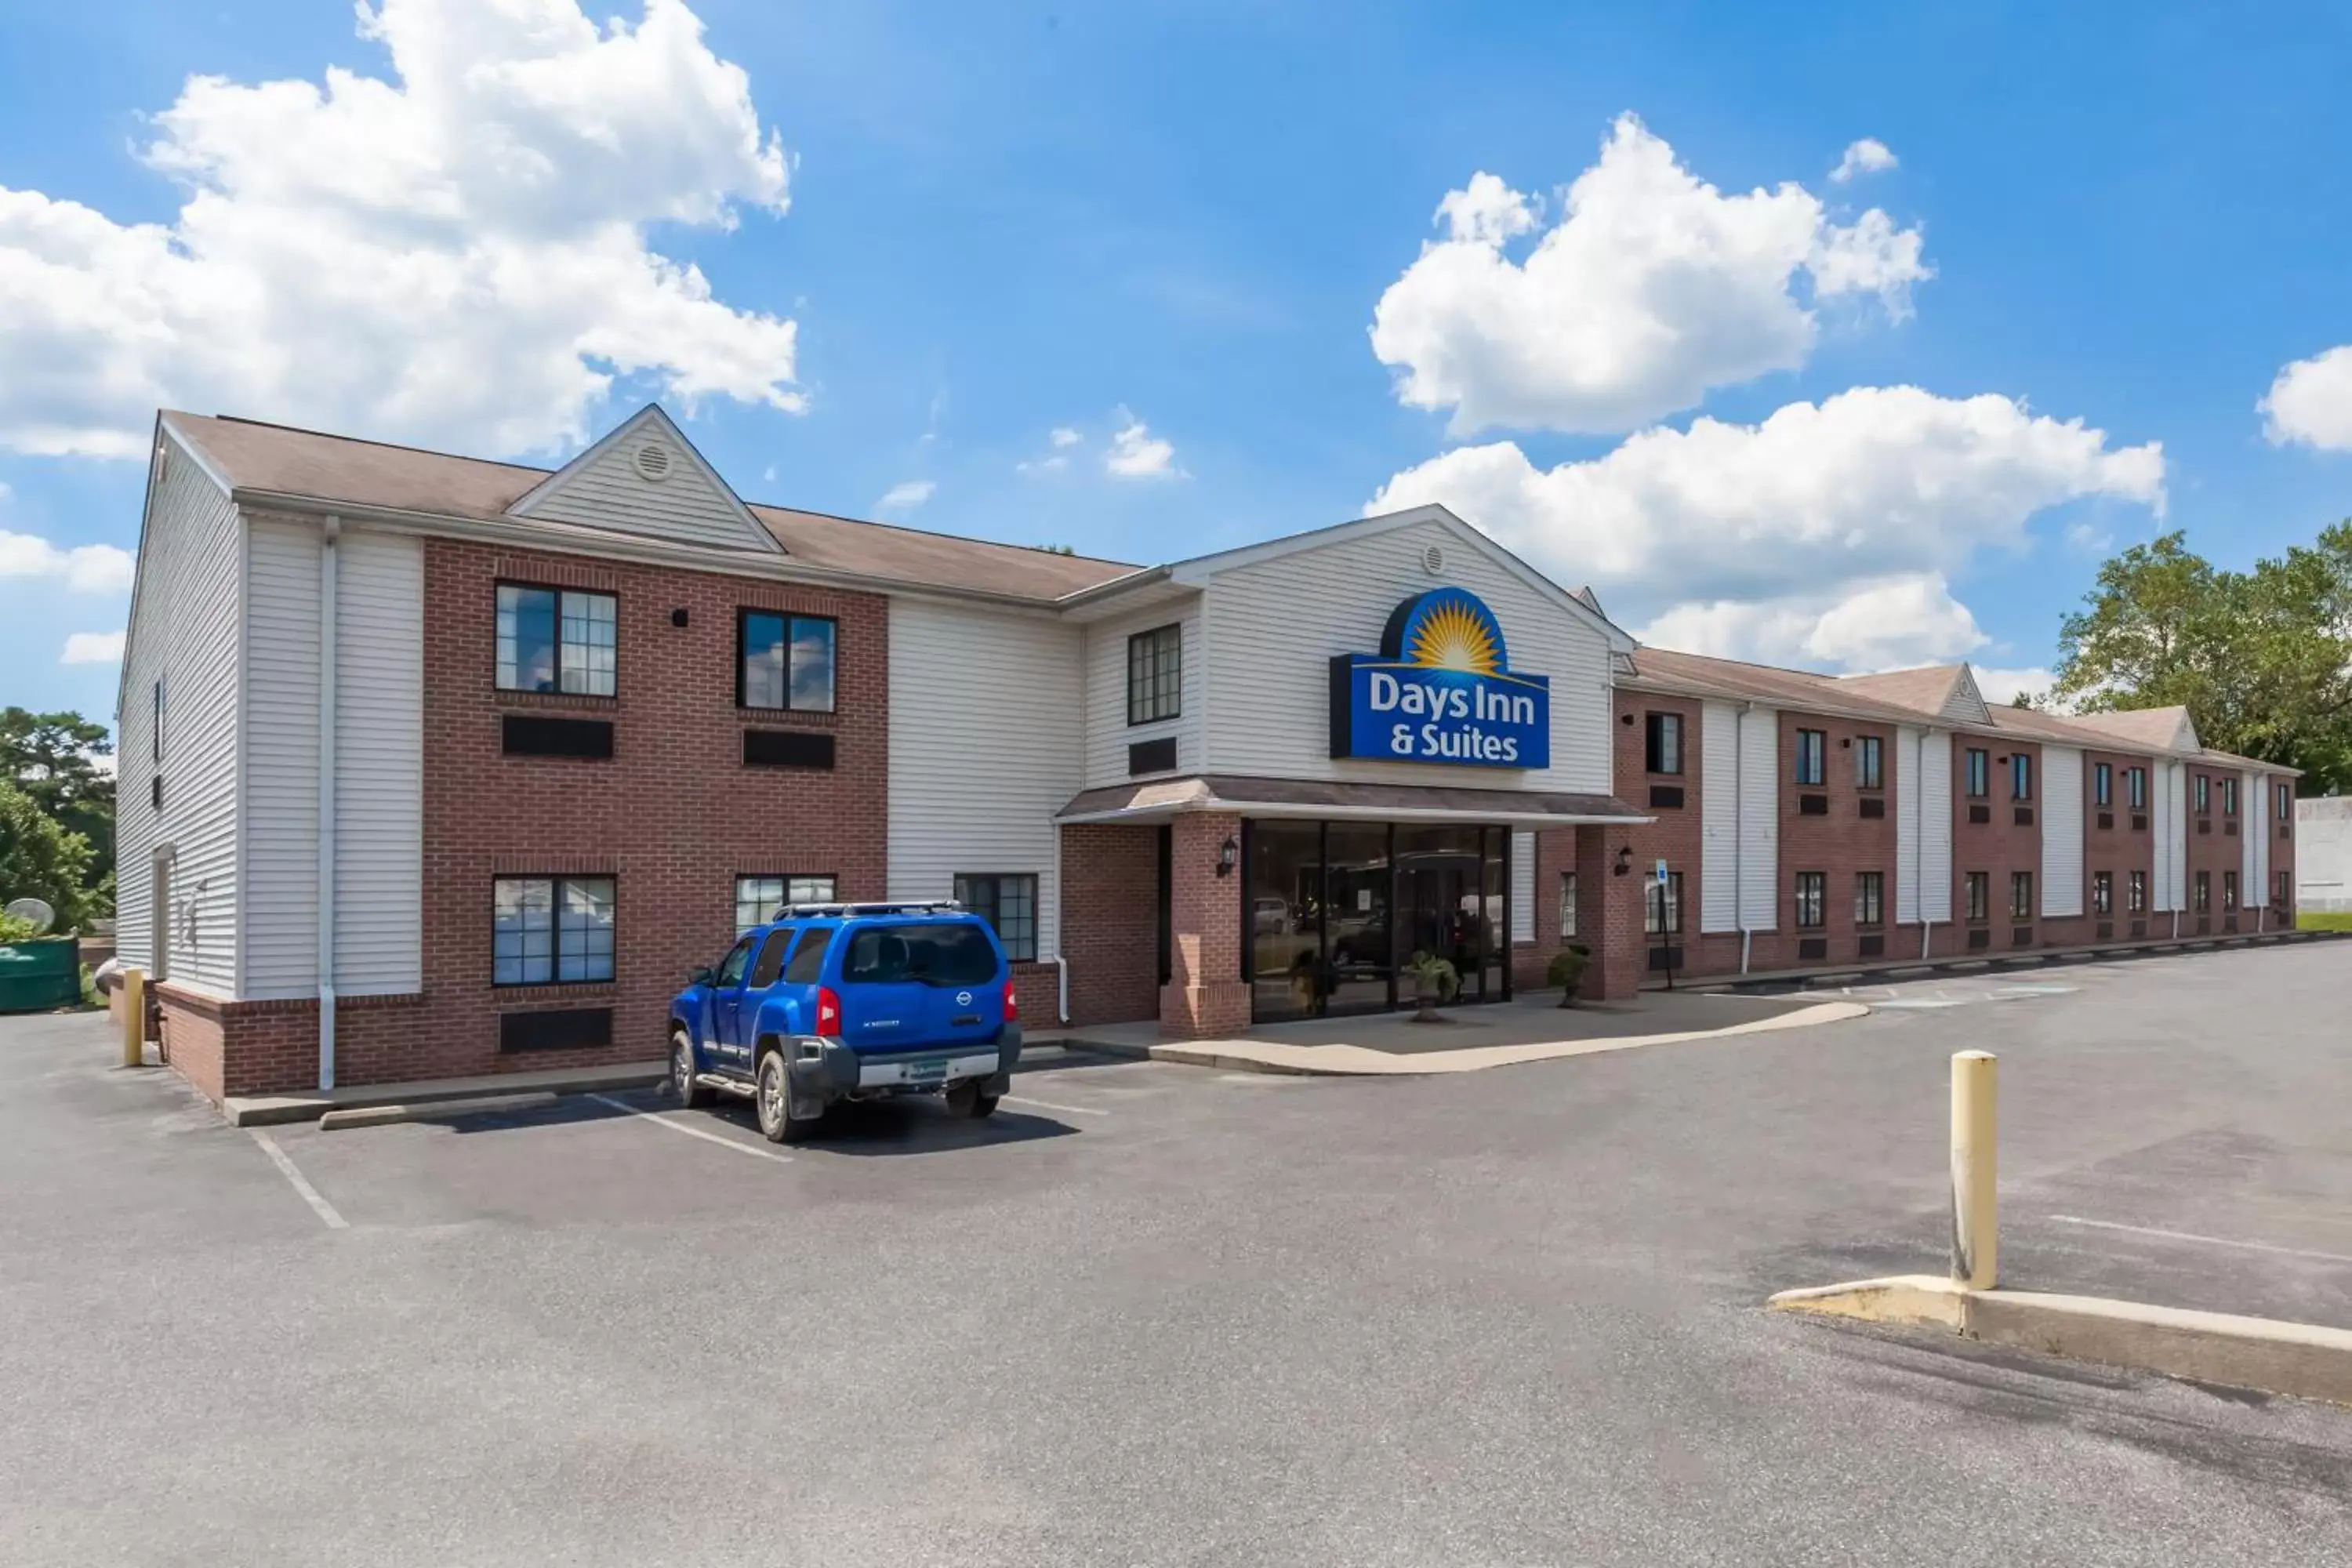 Property Building in Days Inn & Suites by Wyndham Cambridge